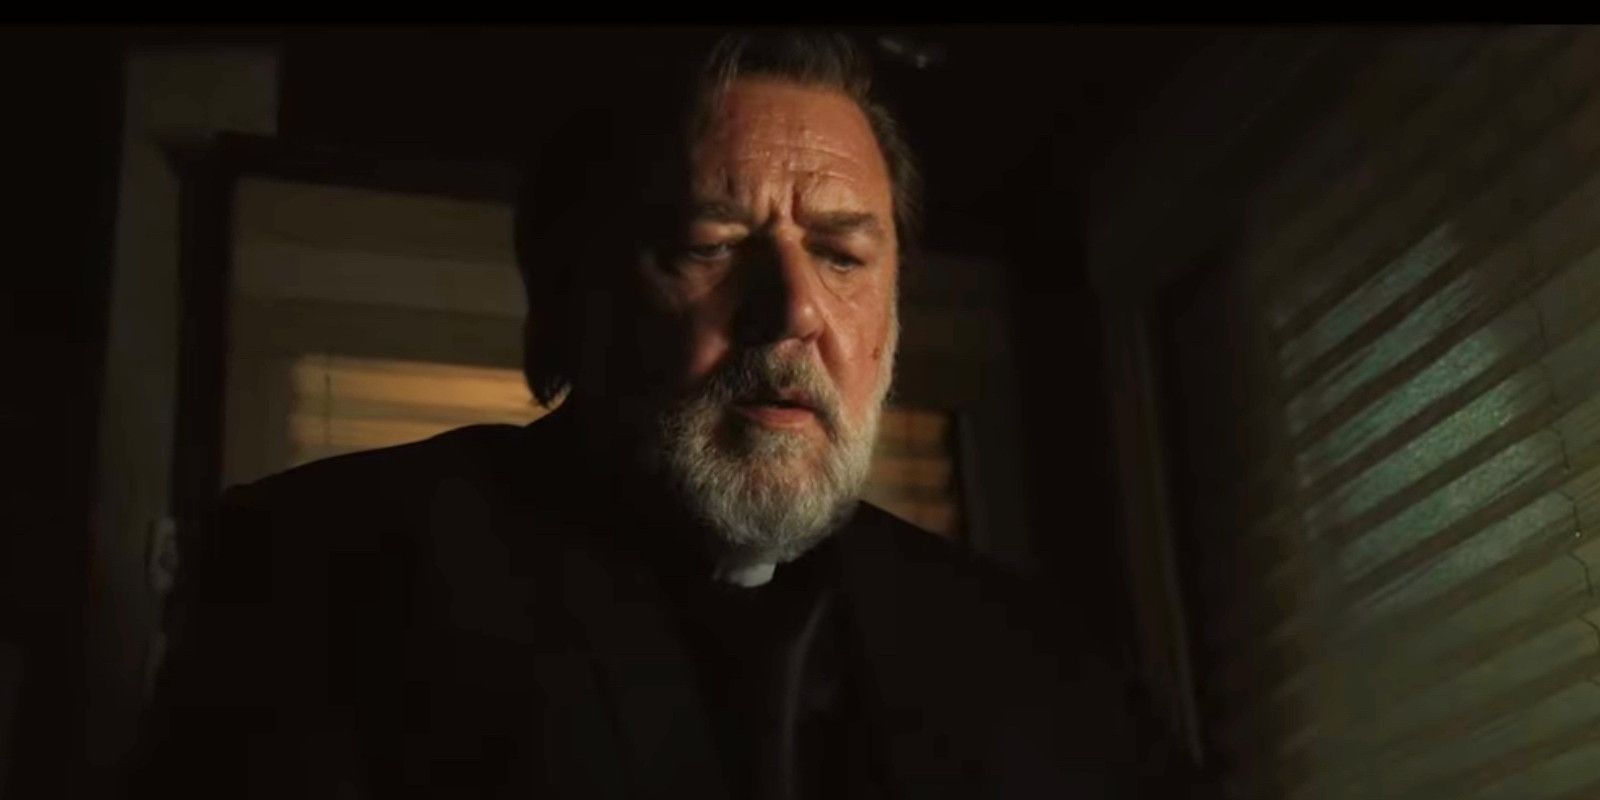 The Exorcism Trailer Reveals Russell Crowe's New Horror Movie